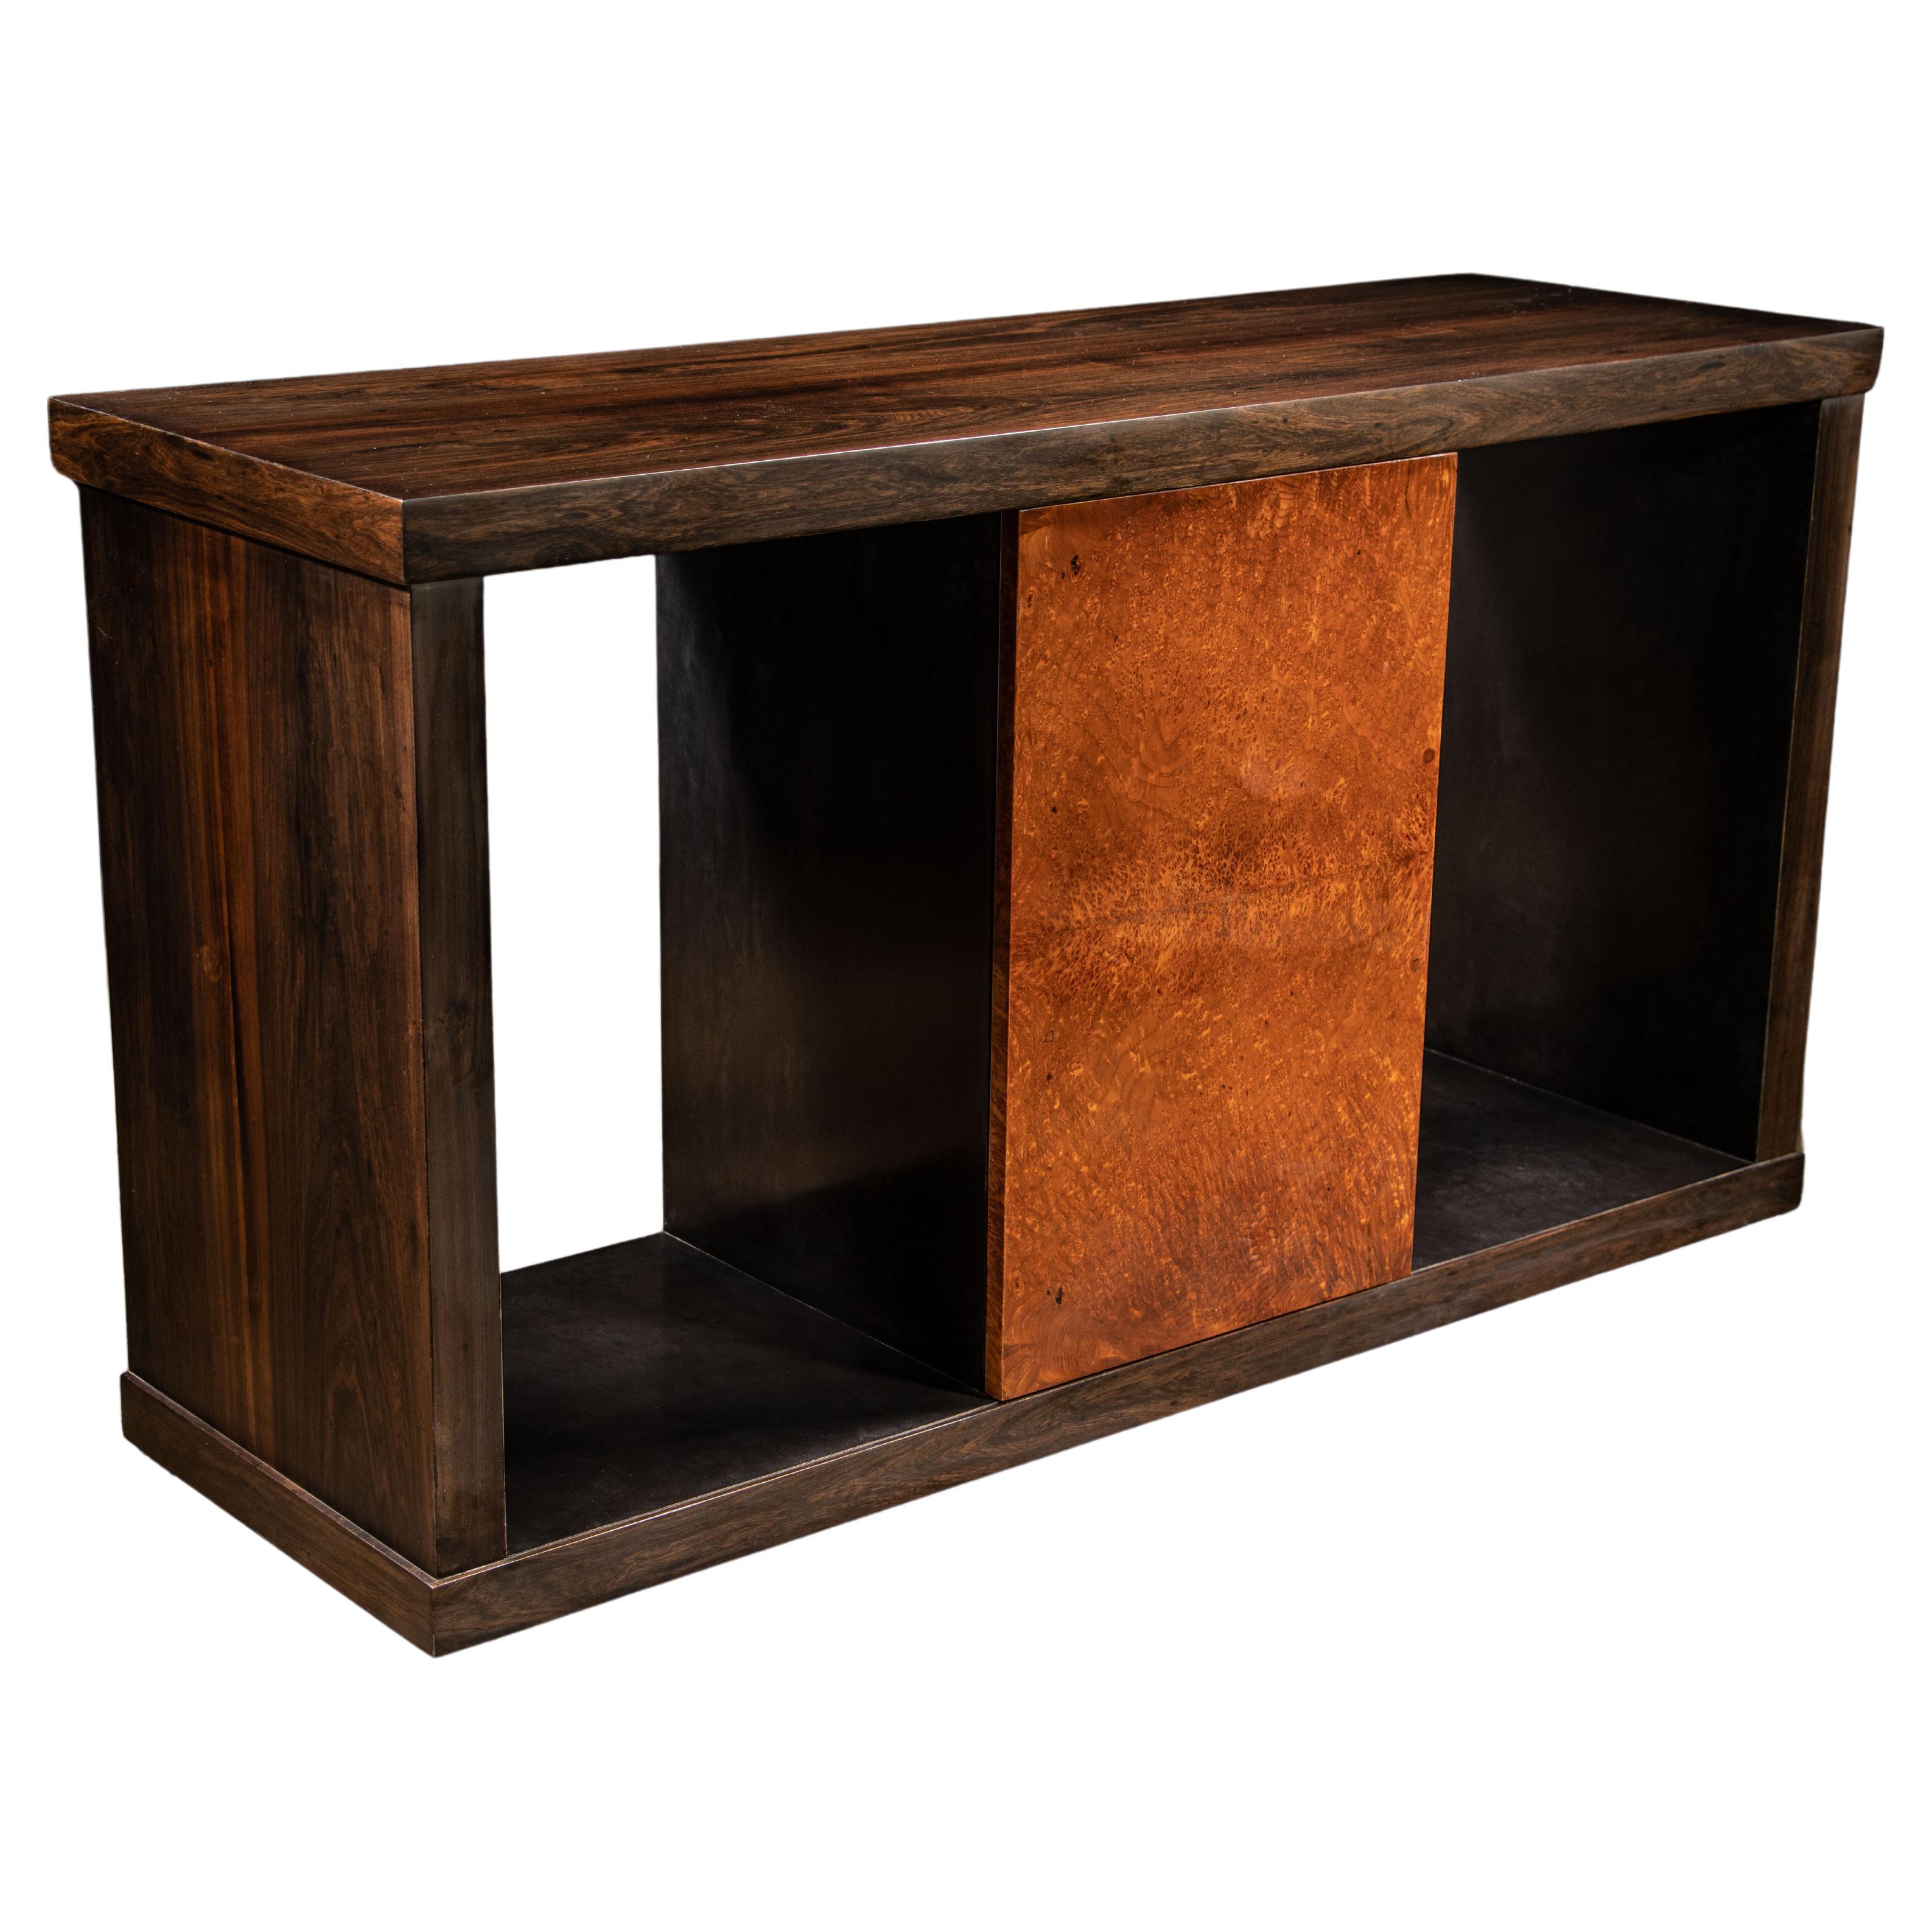 Customizable Exotic Wood & Oil Rubbed Bronze Sideboard by Costantini, Bertolucci